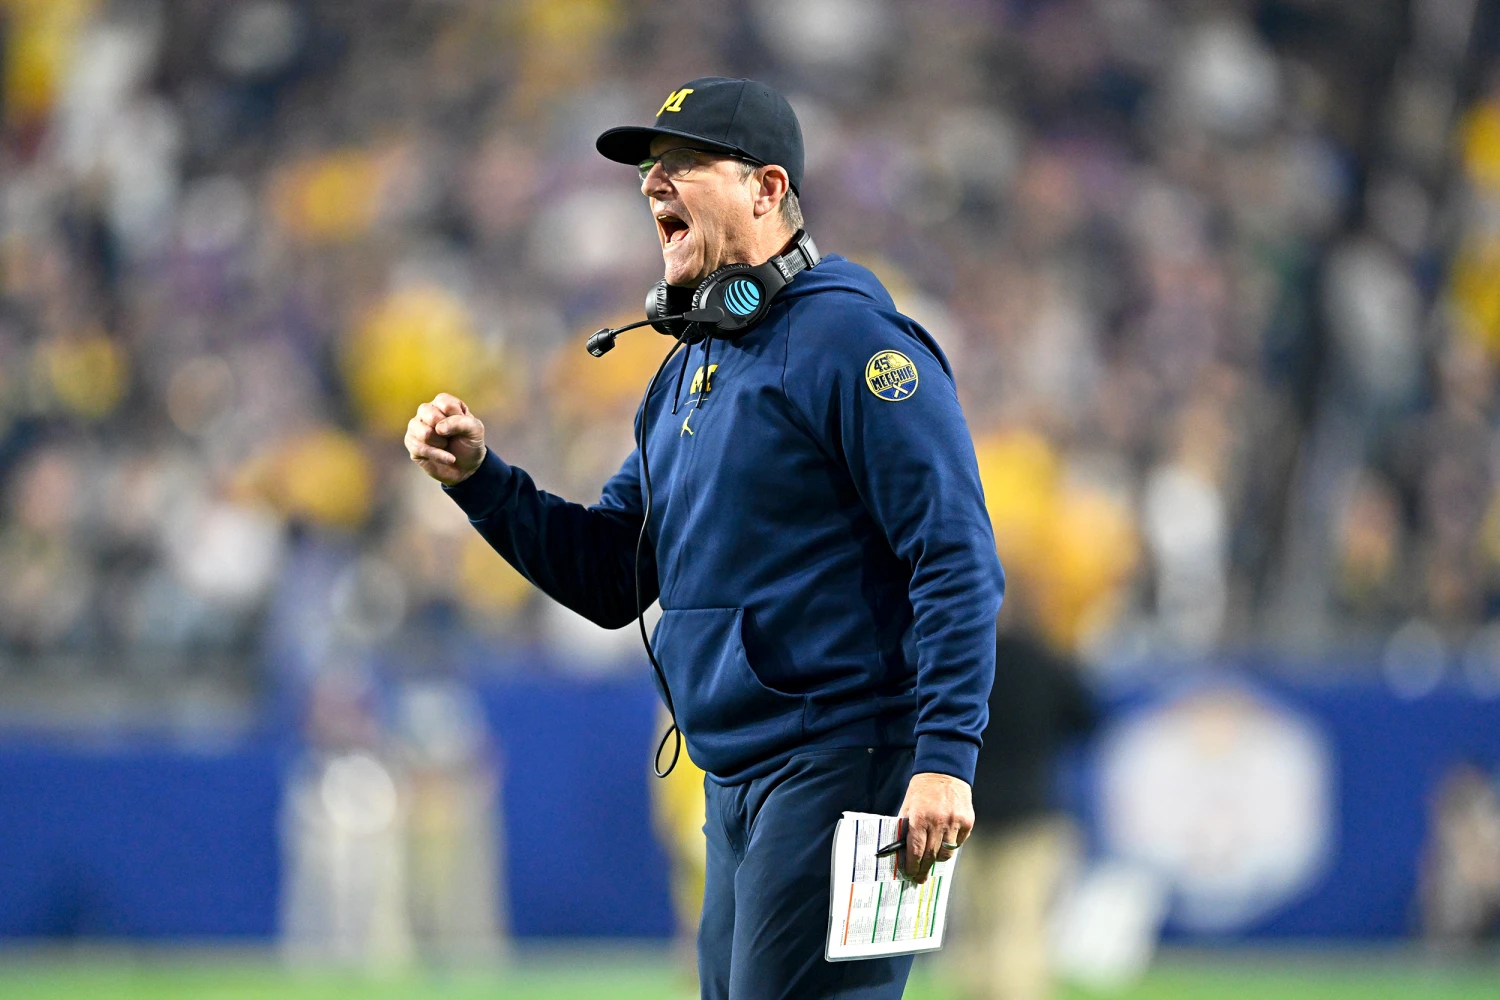 A Fresh Start in LA Jim Harbaugh's Impact on the Los Angeles Chargers' Championship Quest